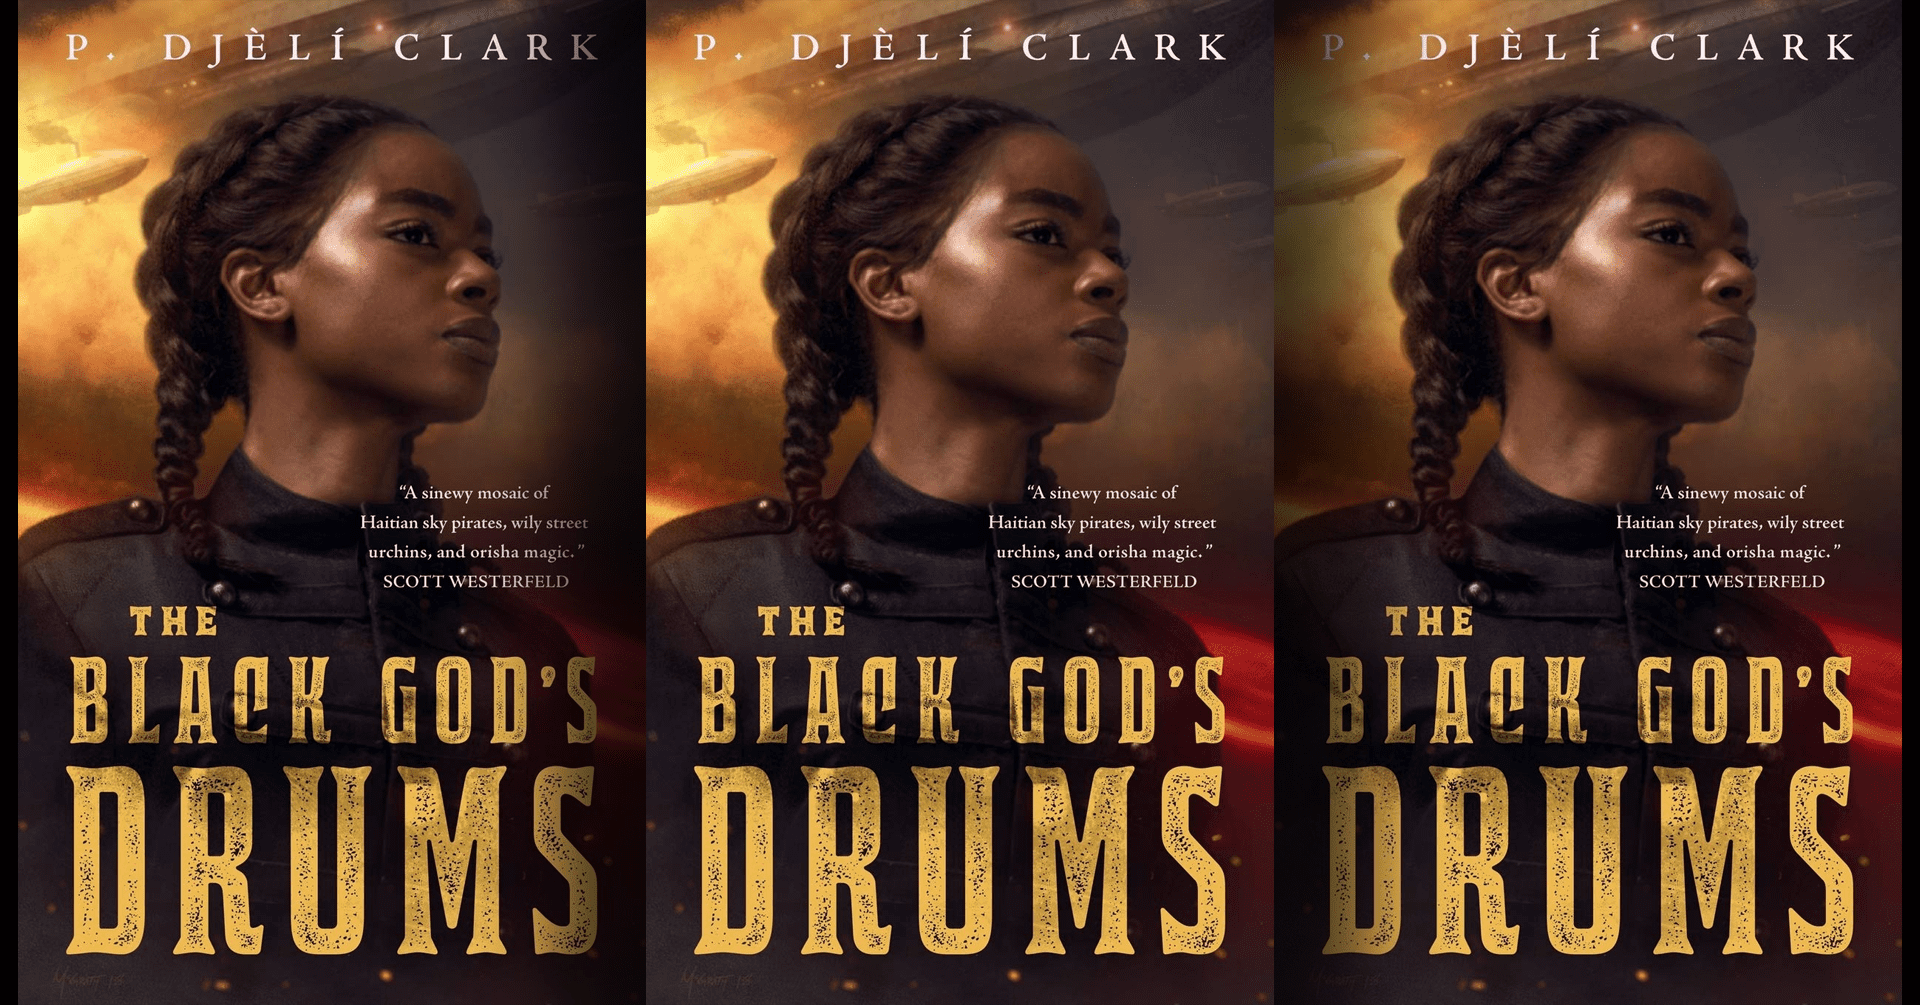 The Black God's Drums by P. Djeli Clark (book cover)